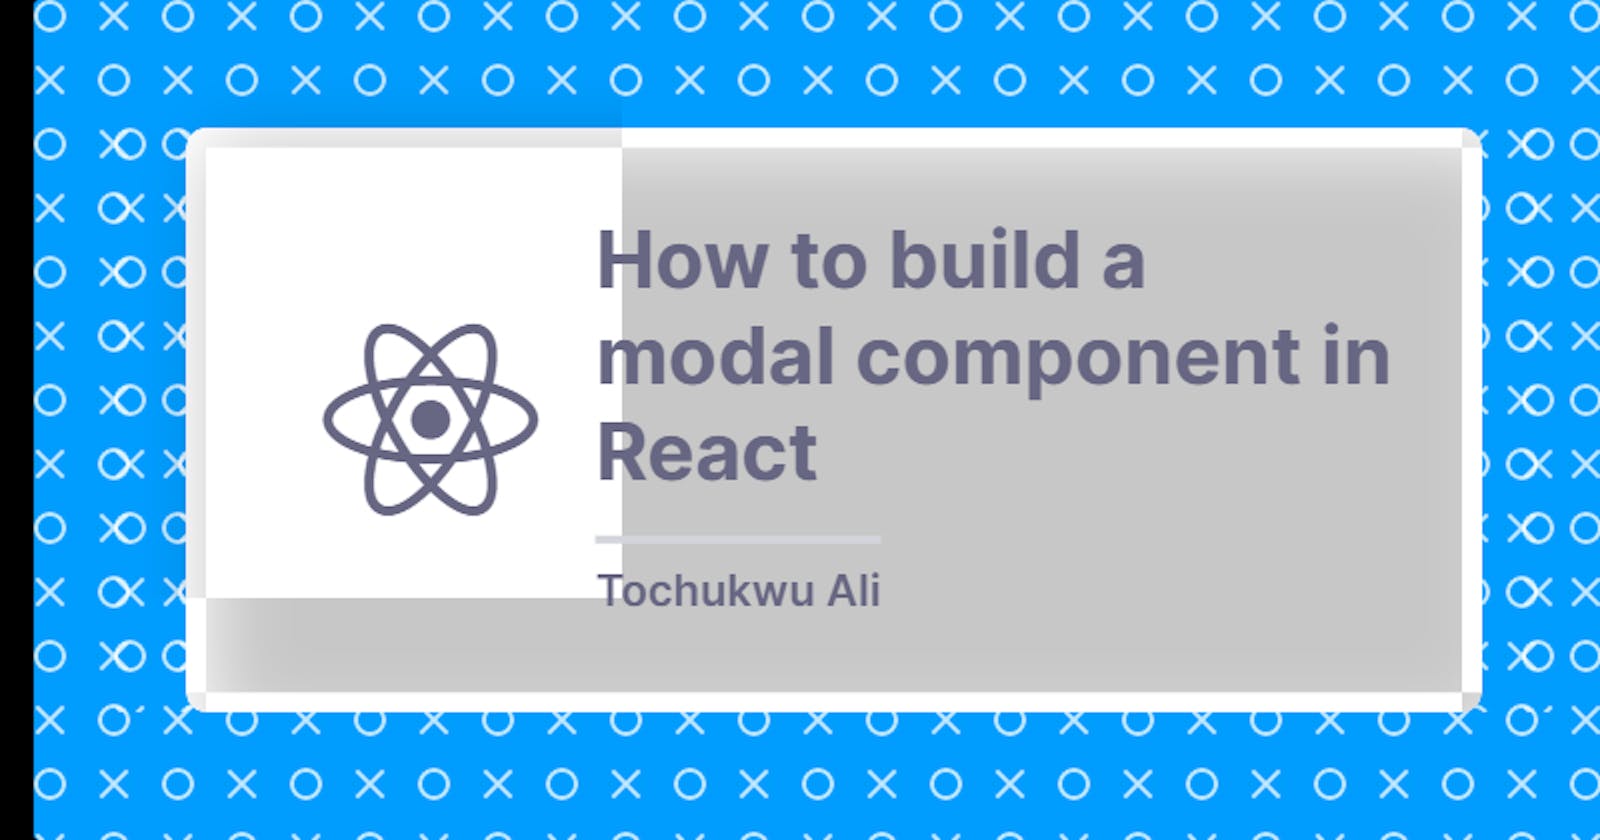 How to build a modal component in React